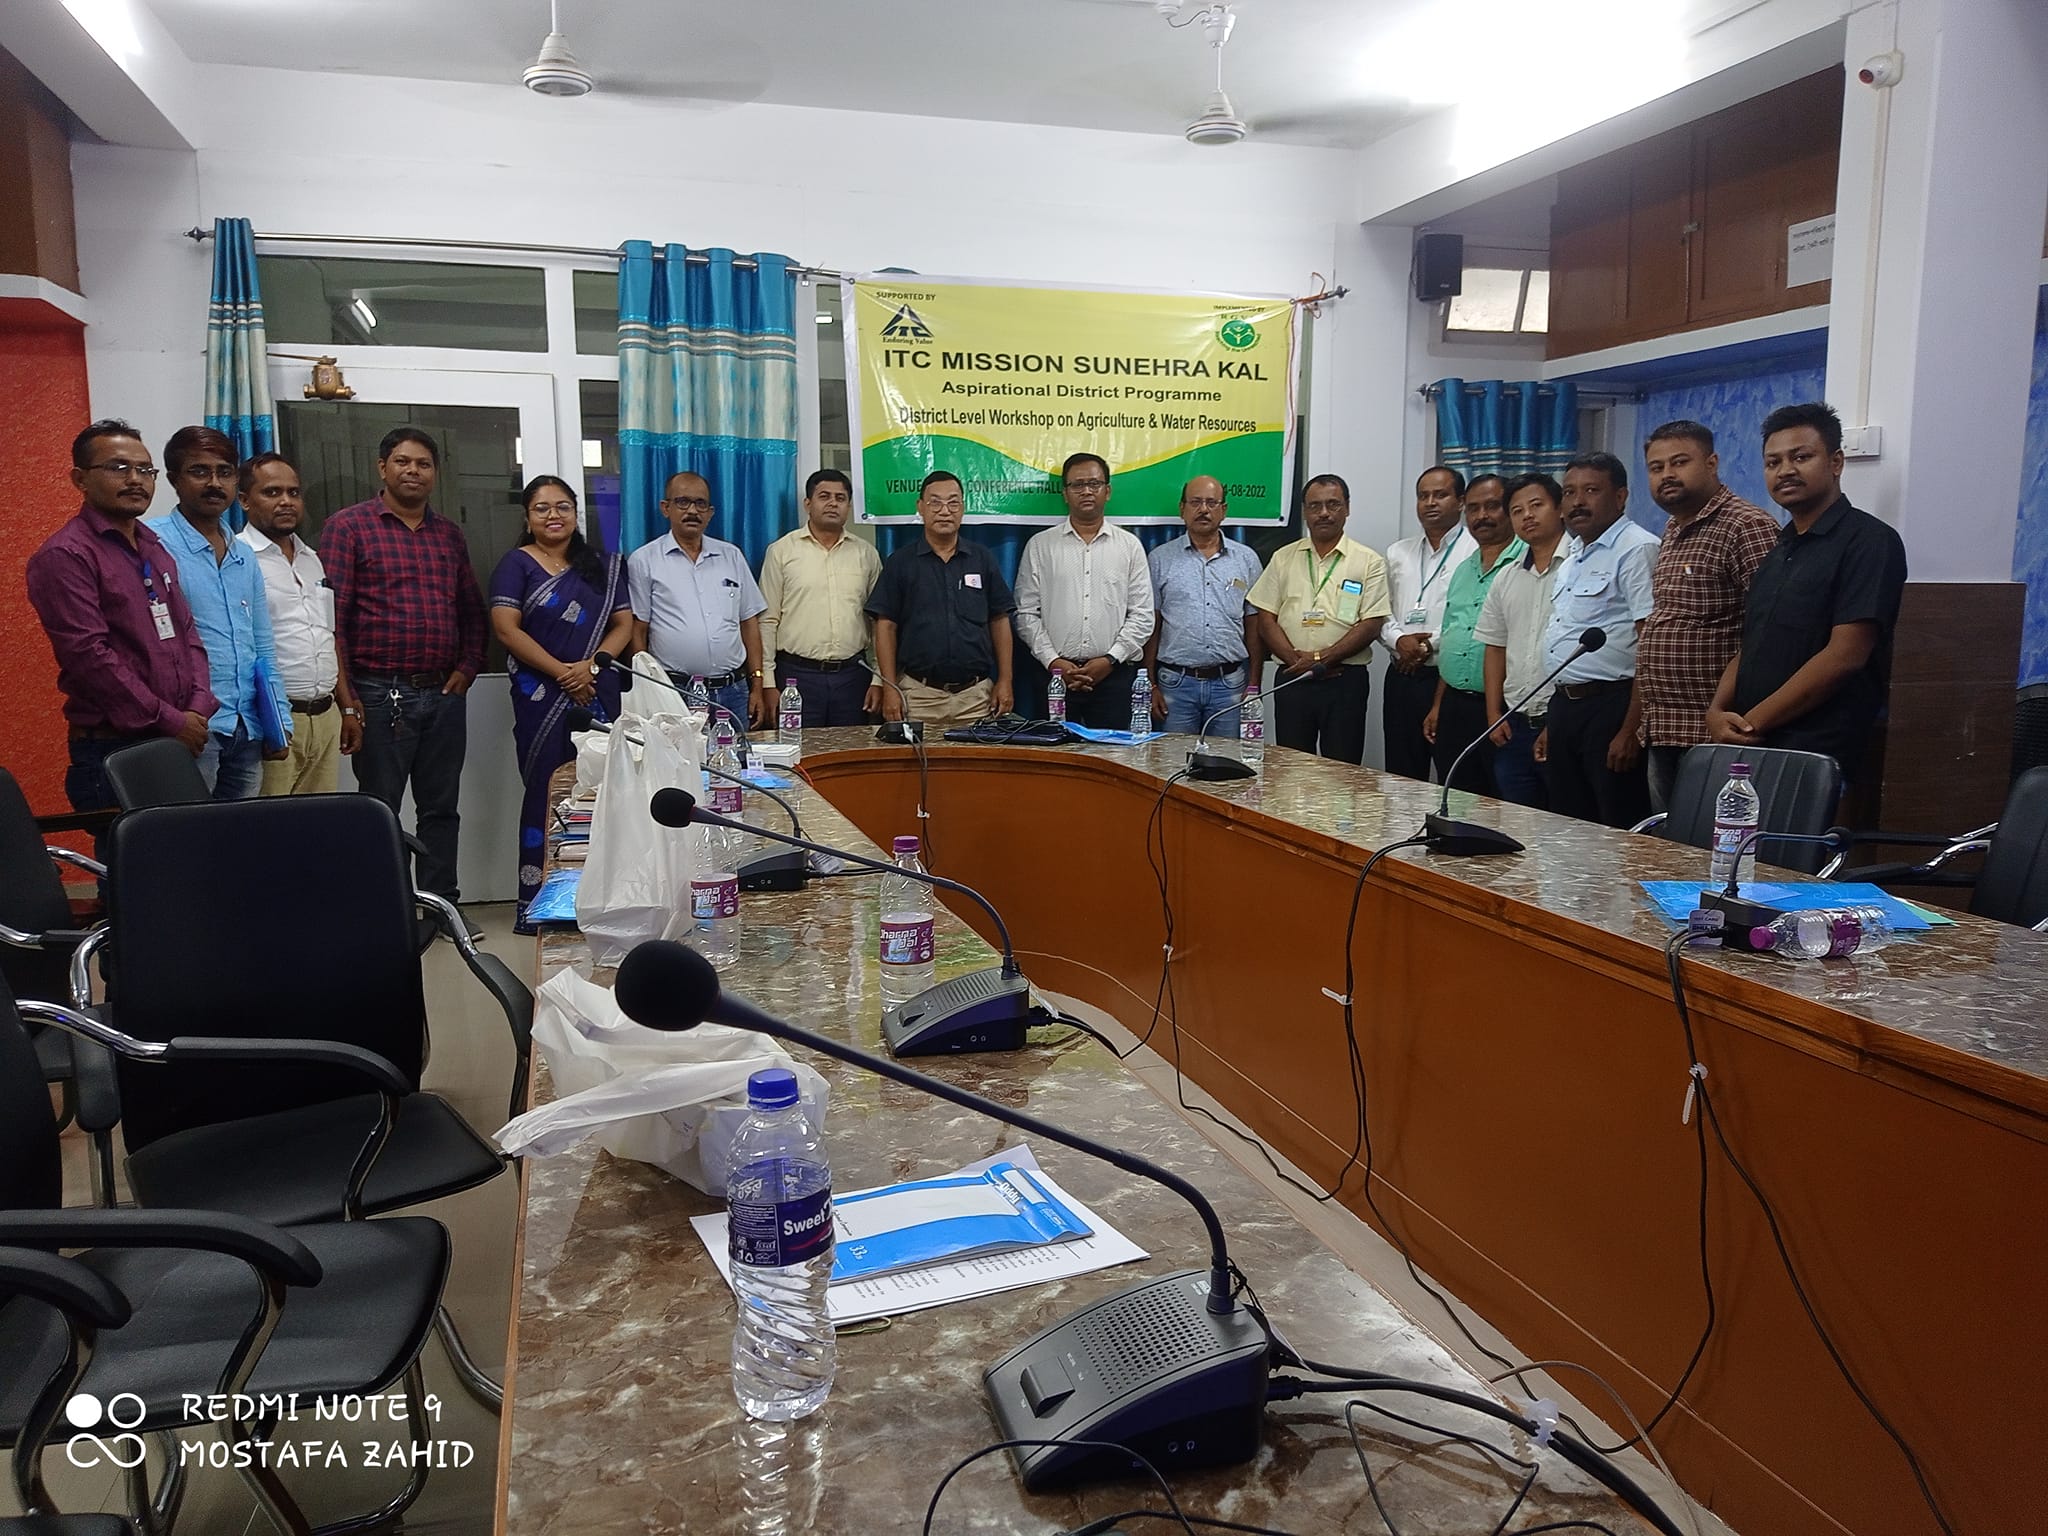 ITC Mission Sunehra Kal – District Level Workshop on Agriculture & Water Resources